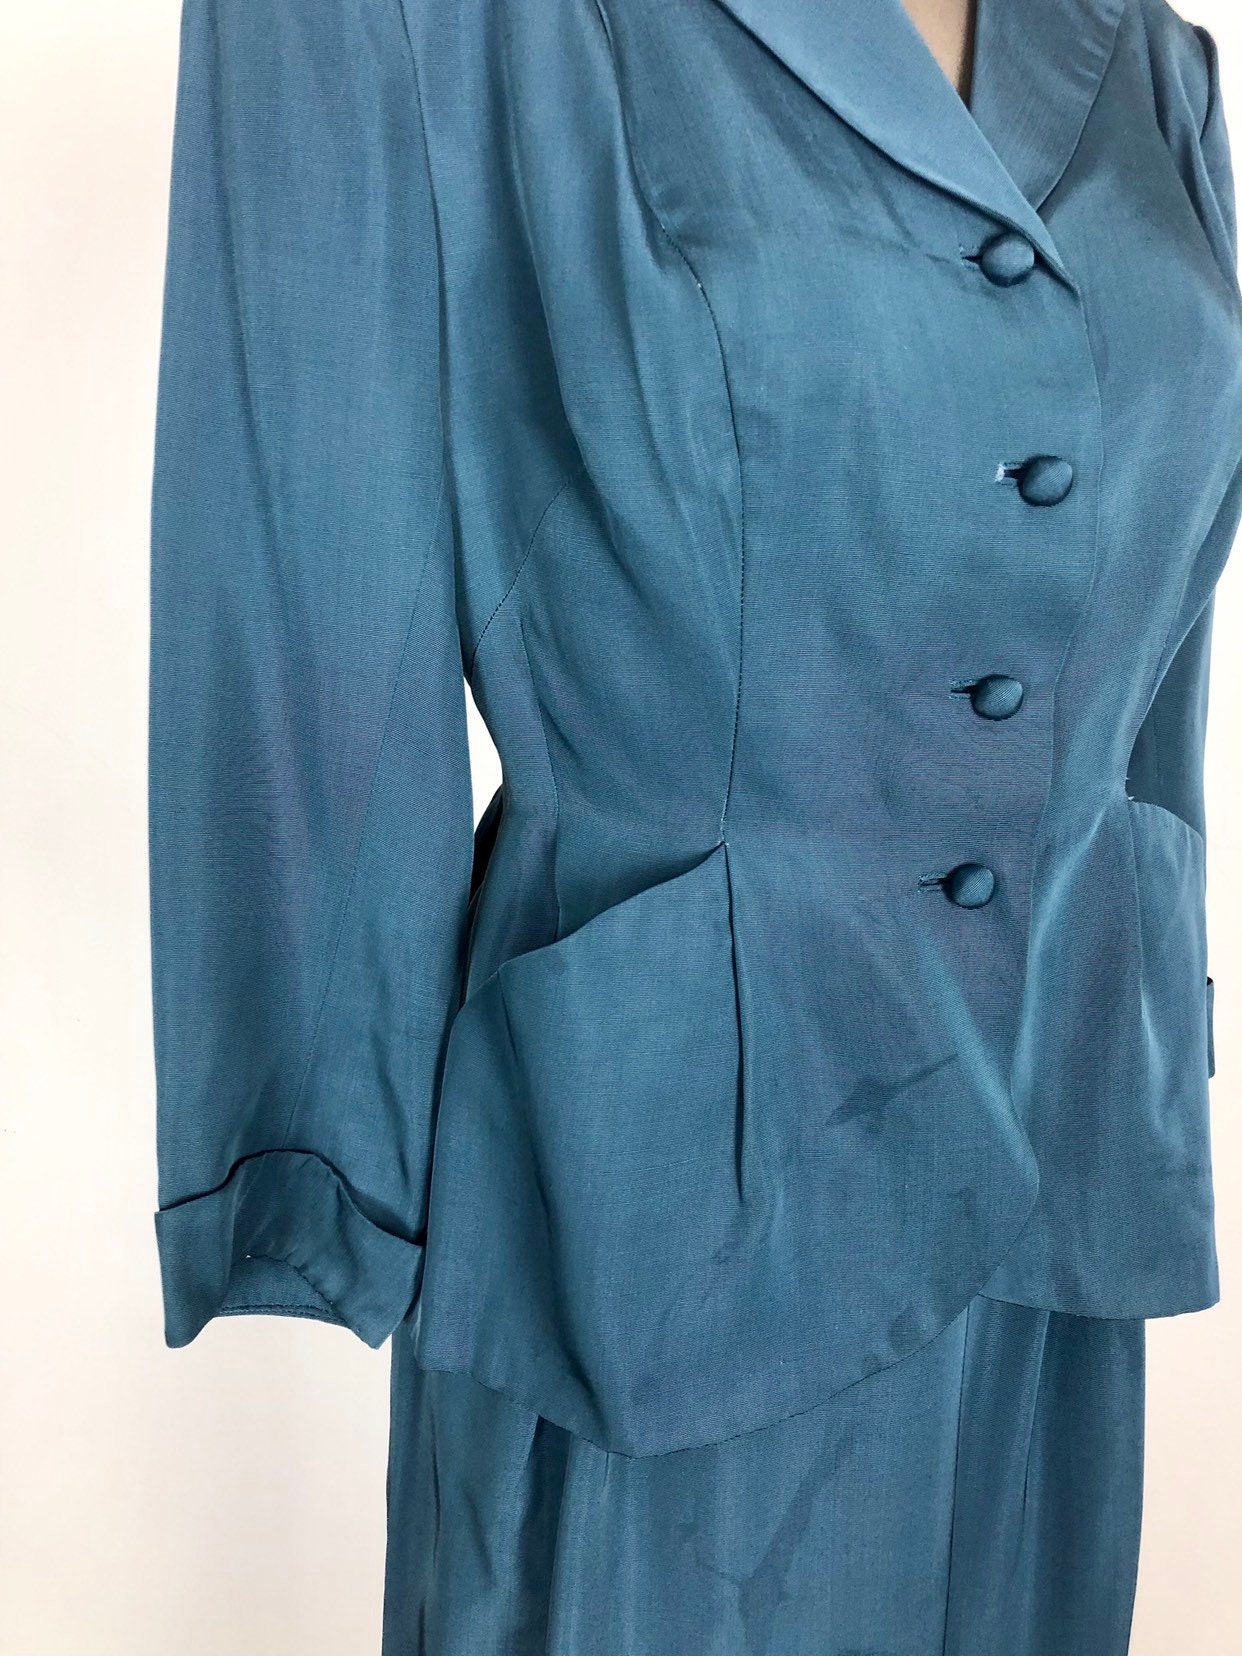 Amazing 1940s Teal Rayon Skirt Suit From Finland S | Etsy